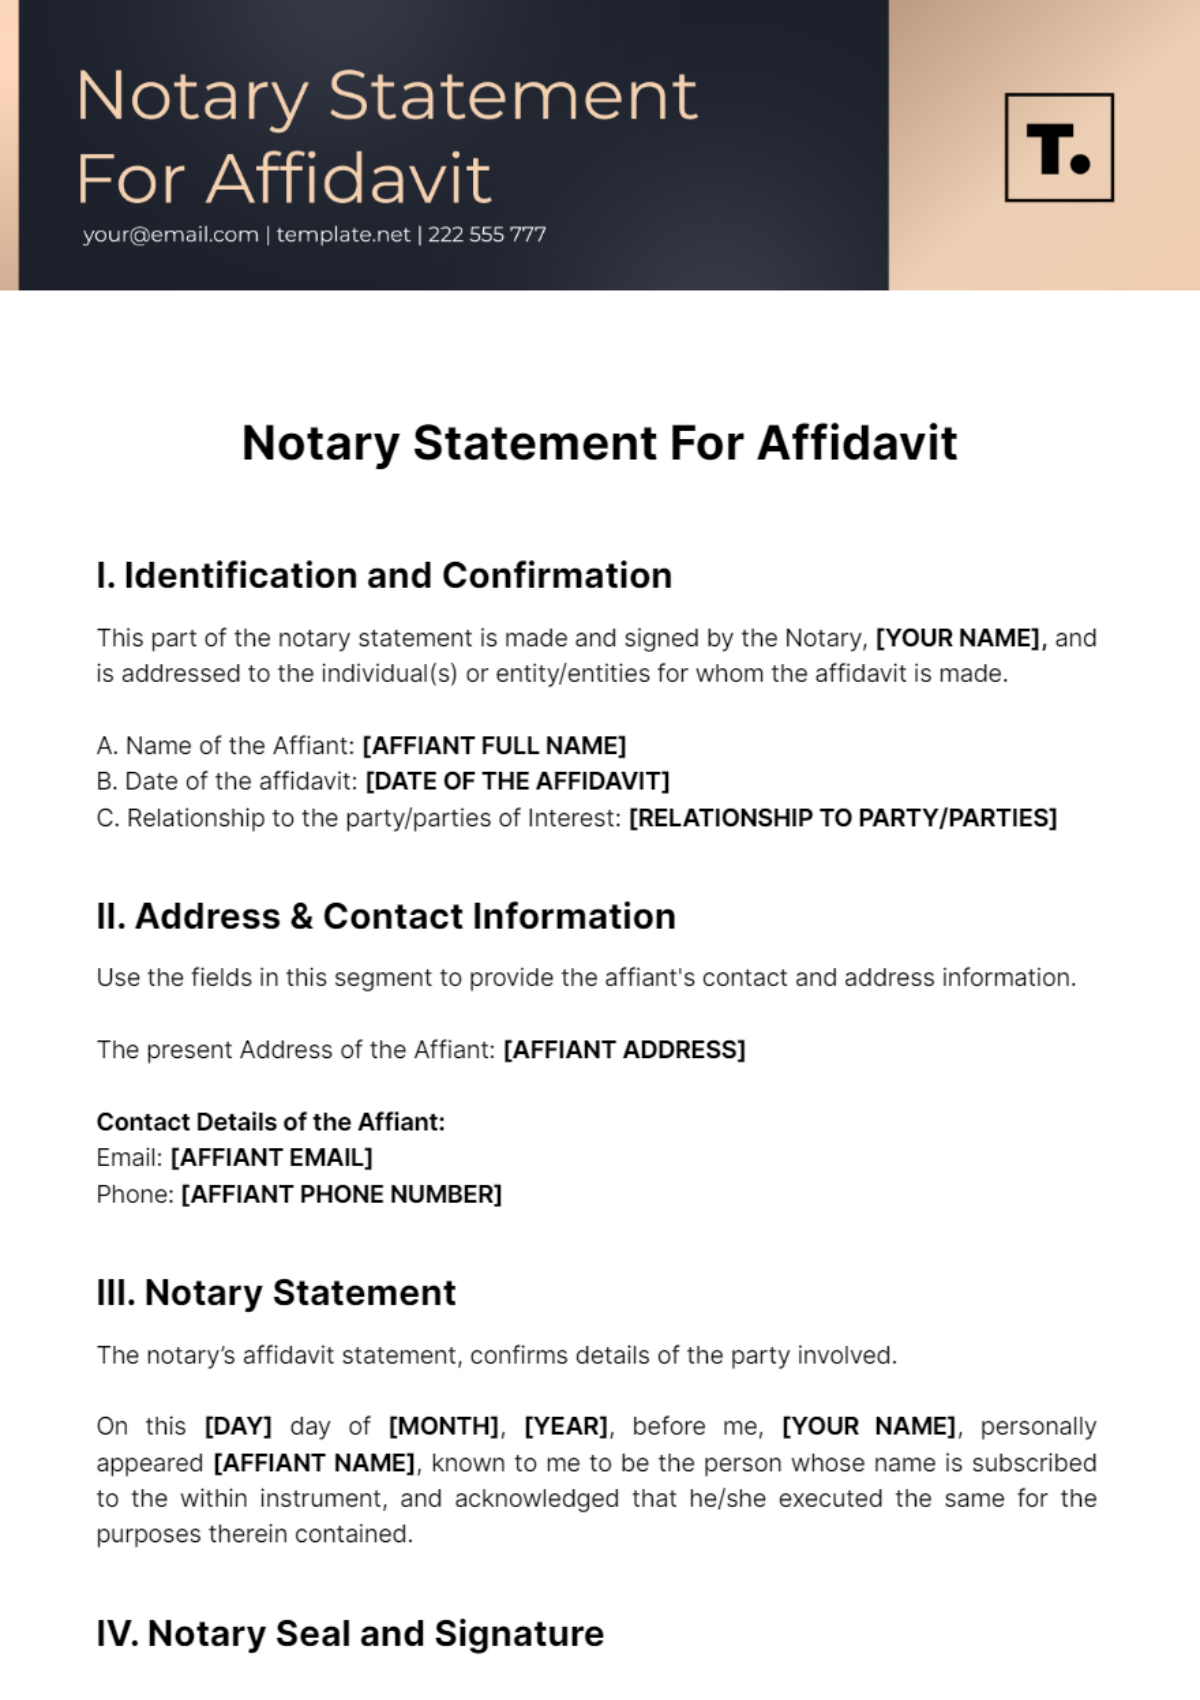 Free Notary Statement For Affidavit Template